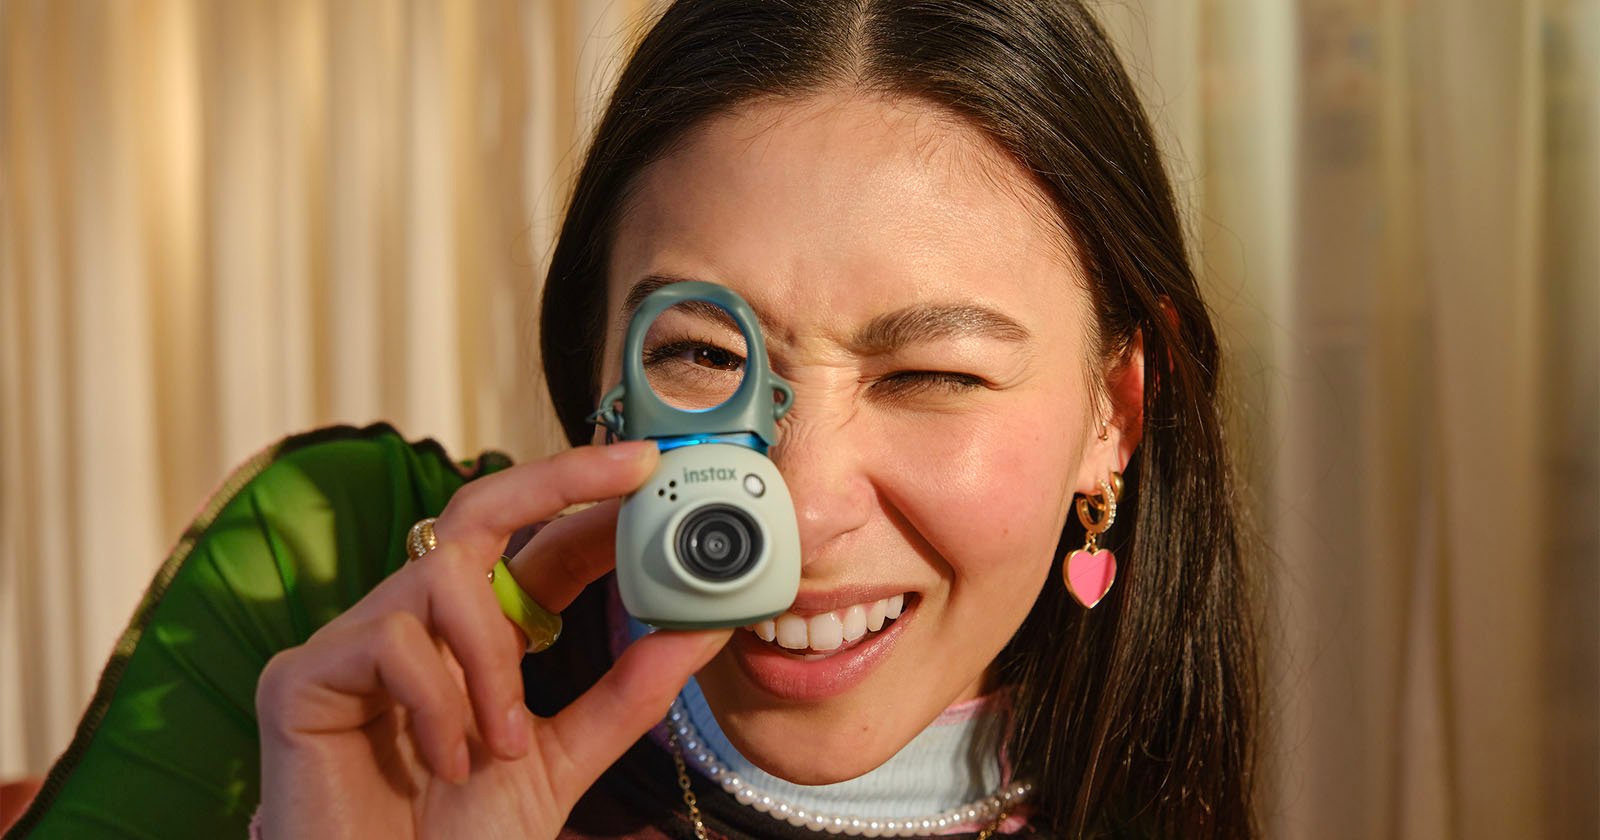 The Fujifilm Instax Pal is a Palm-Sized Camera Thats Instax in Name Only